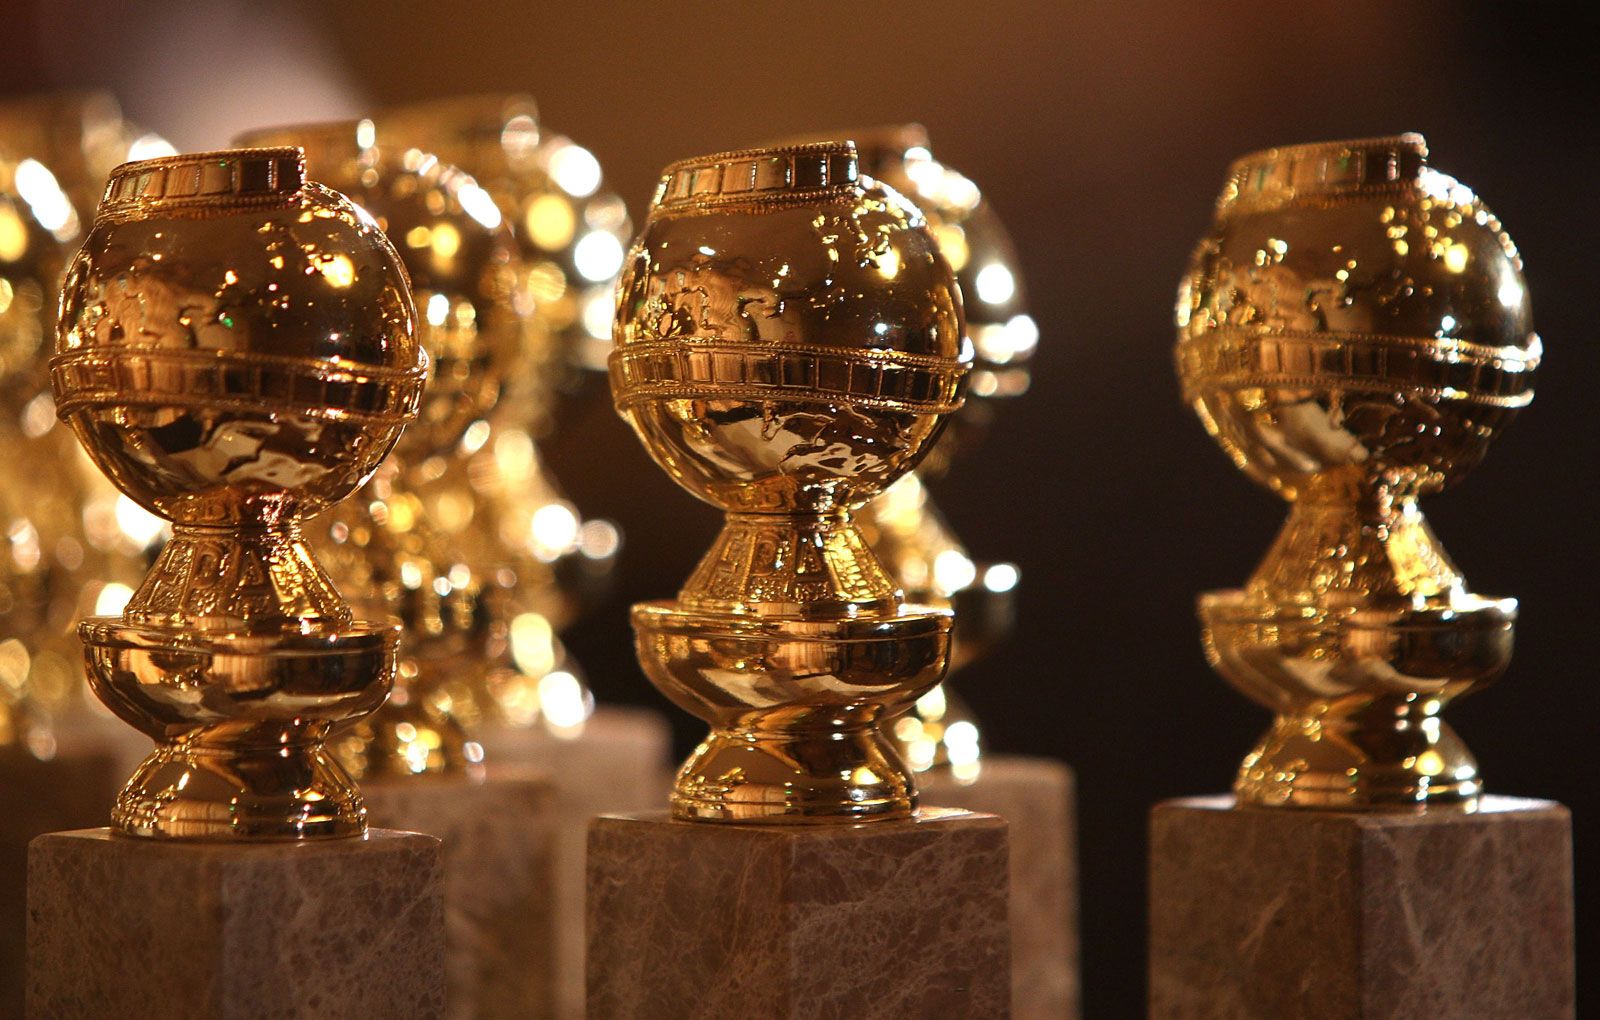 Golden Globes 2021 Get A New Date After Postponement, To Be Held On 28 February 